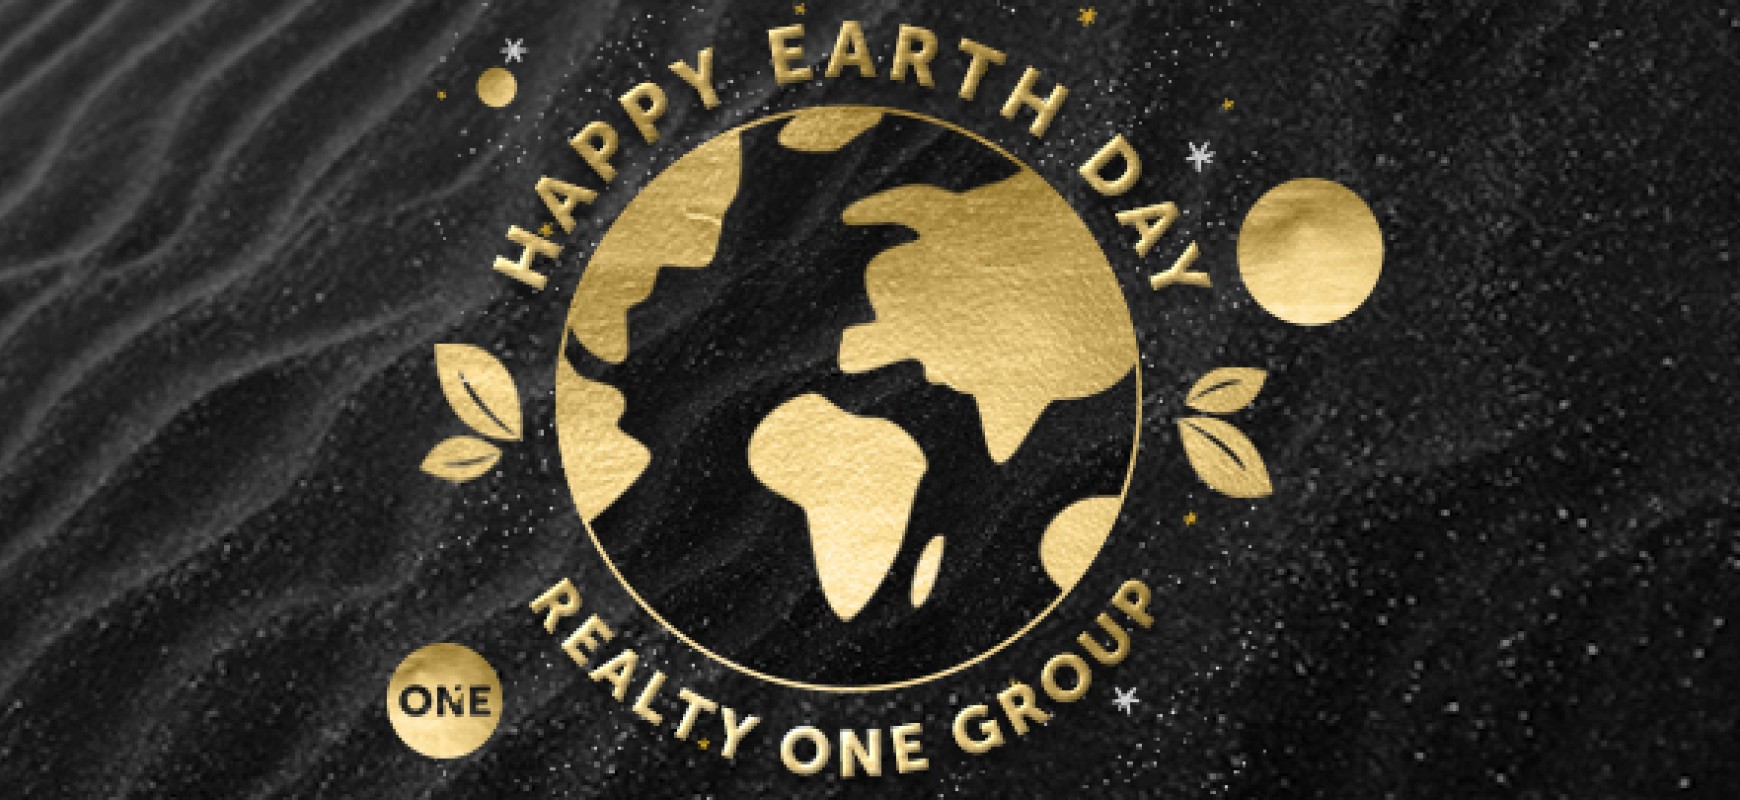 Happy Earth Day from Realty ONE Group 